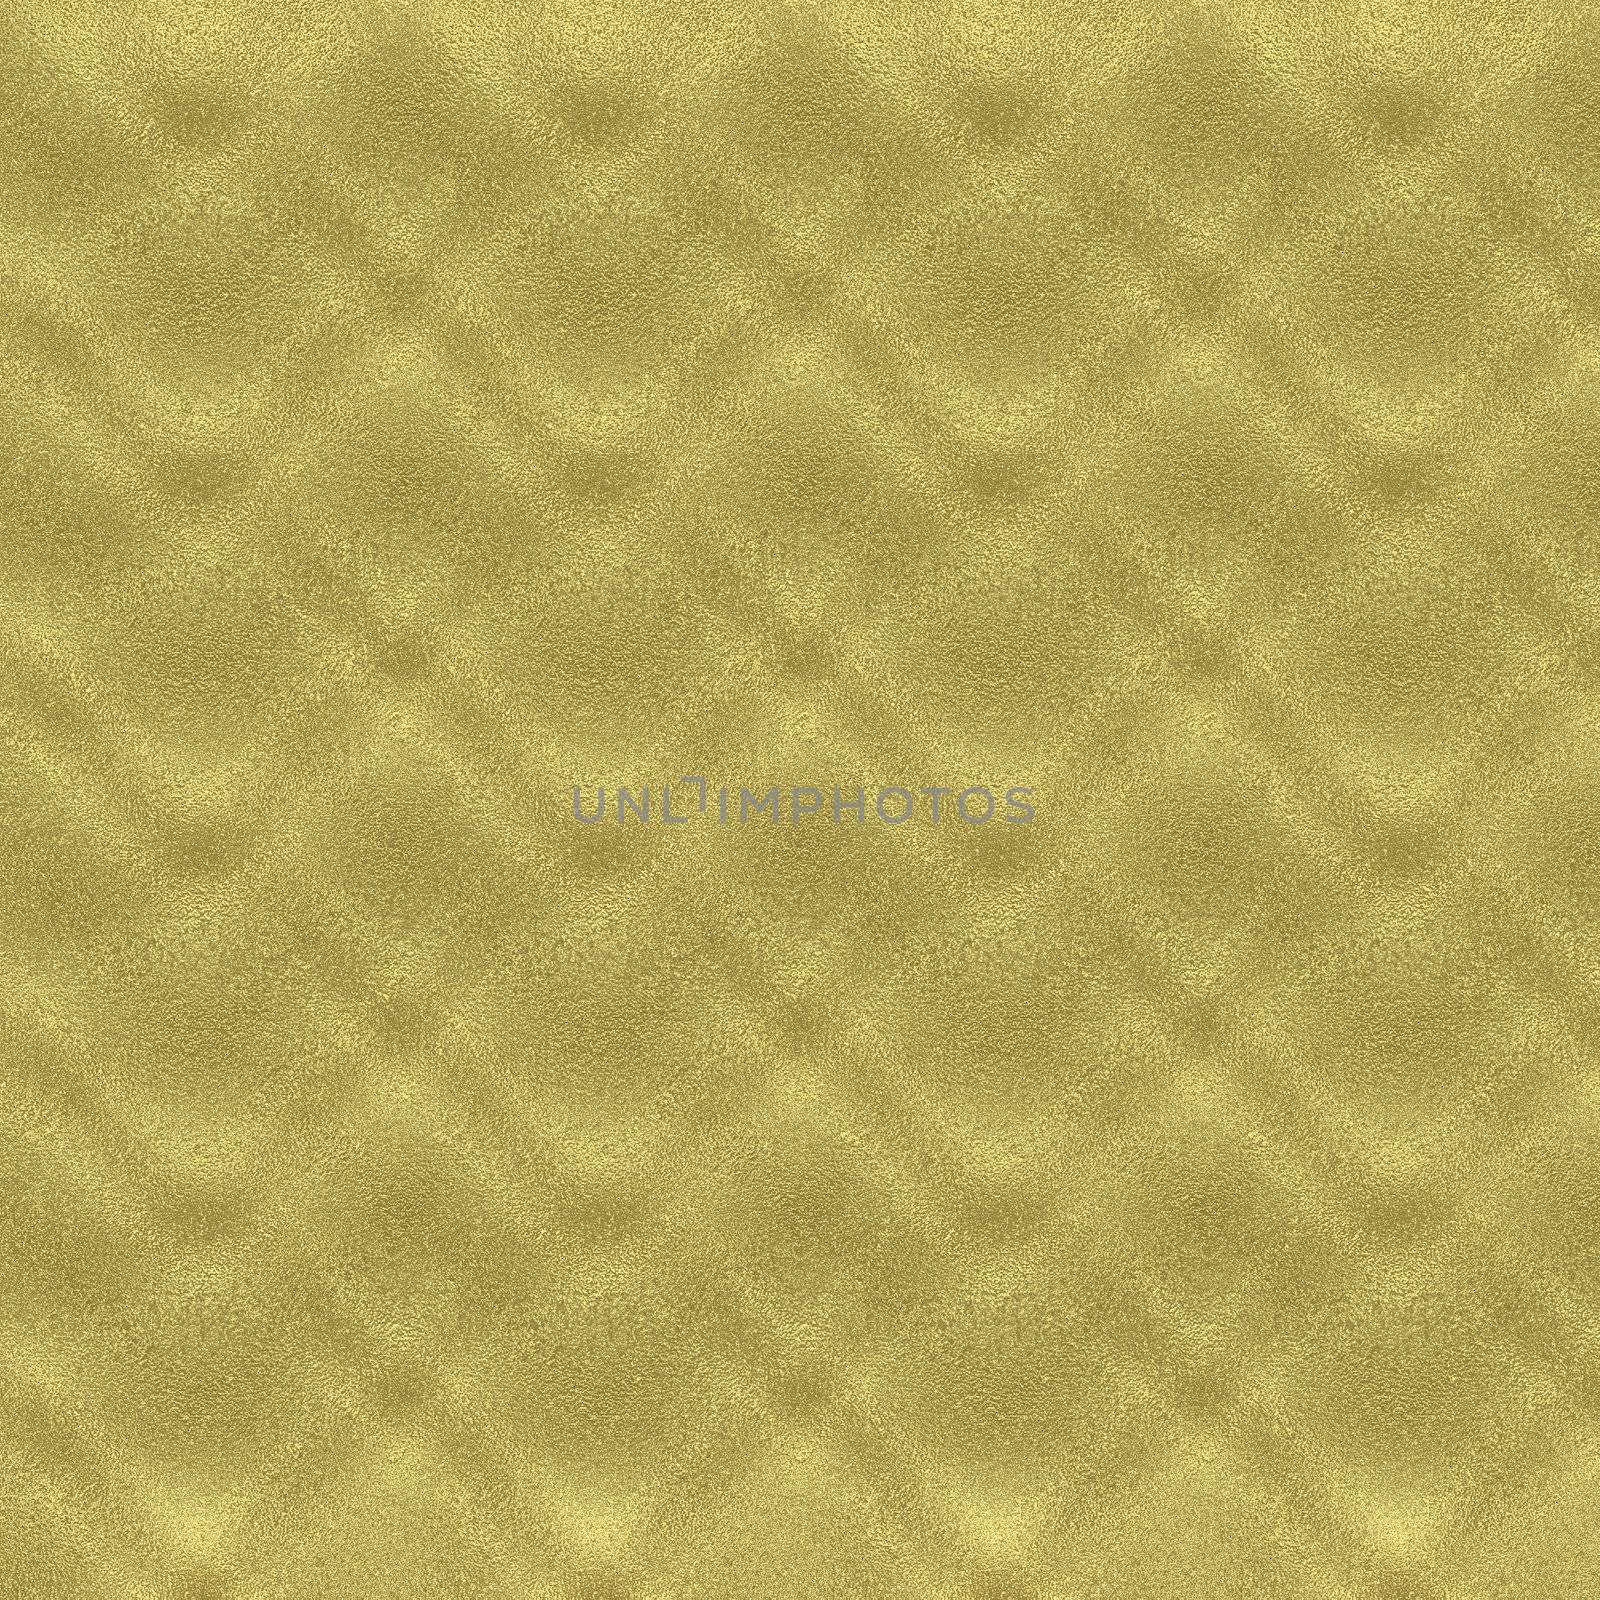 golden background with frosted glass texture

